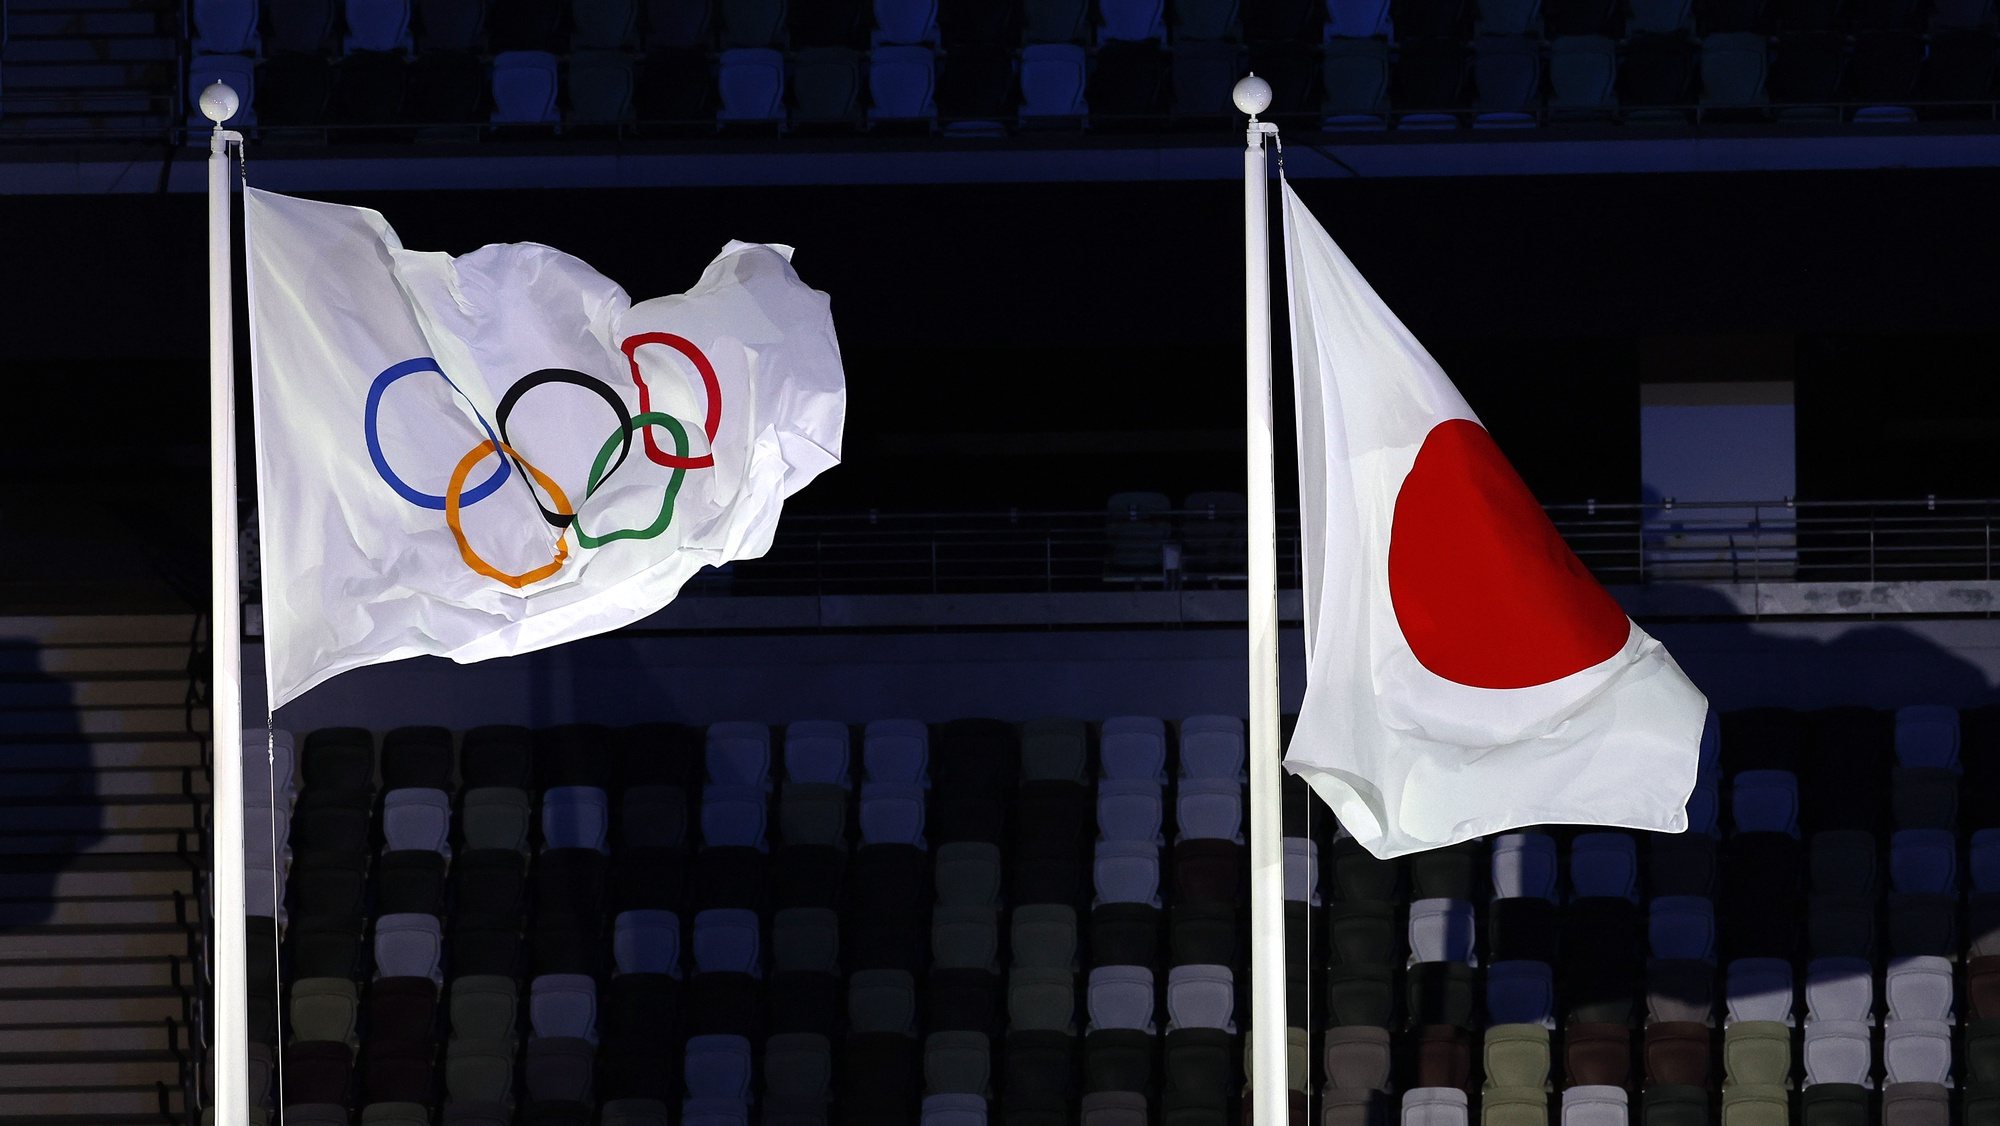 epa09360022 The Olympic flag flies next to the Japanese flag during the Opening Ceremony of the Tokyo 2020 Olympic Games at the Olympic Stadium in Tokyo, Japan, 23 July 2021.  EPA/RUNGROJ YONGRIT